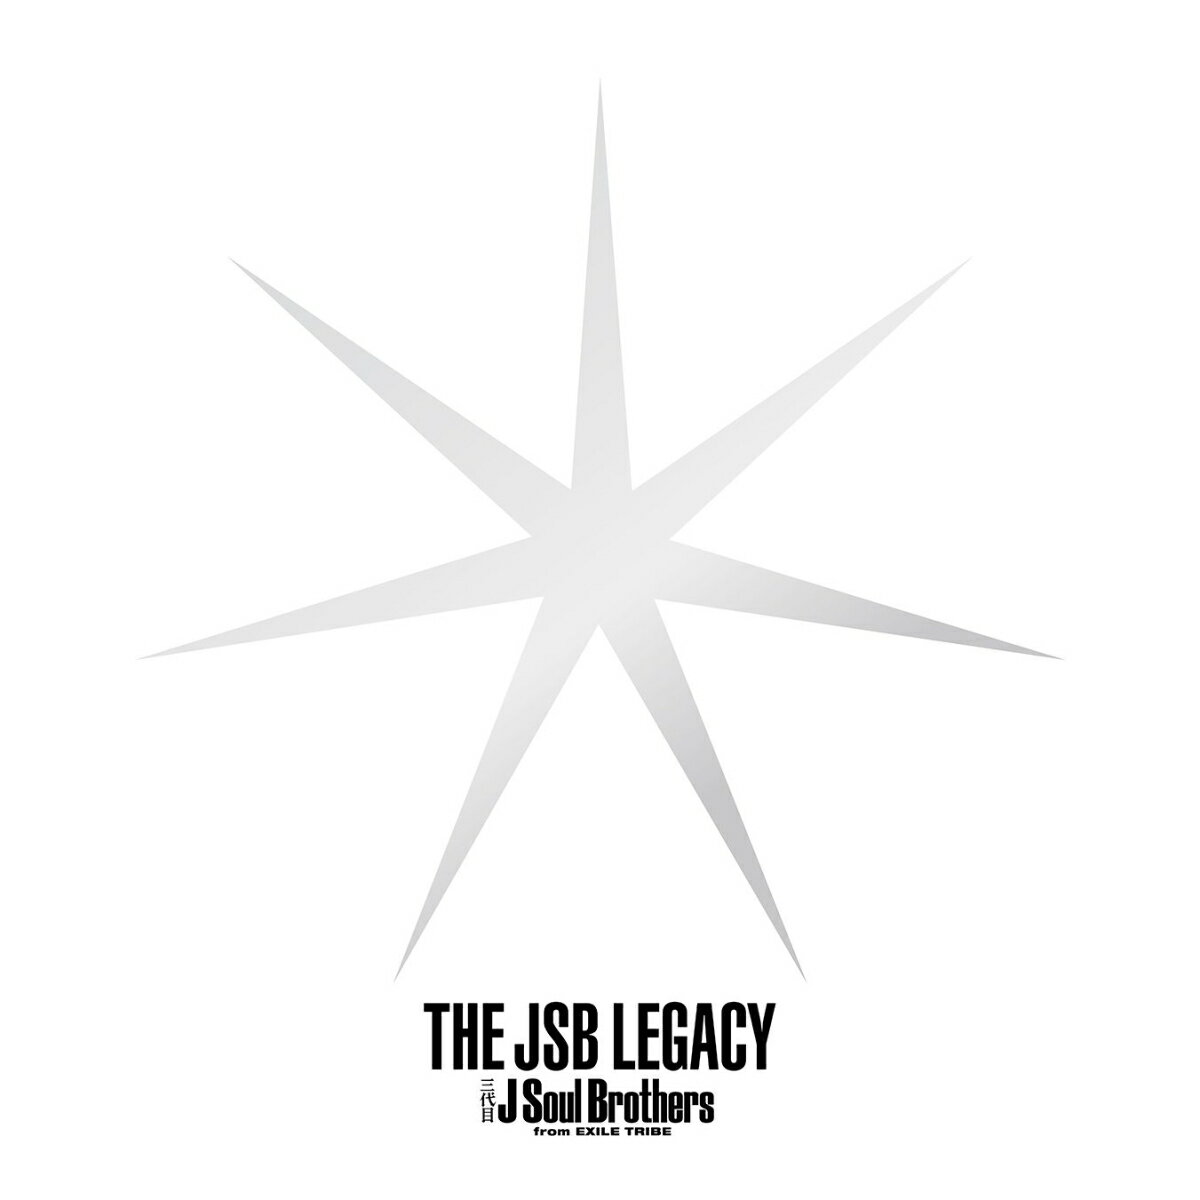 THE JSB LEGACY (初回限定盤 CD＋2Blu-ray) [ 三代目 J Soul Brothers from EXILE TRIBE ]